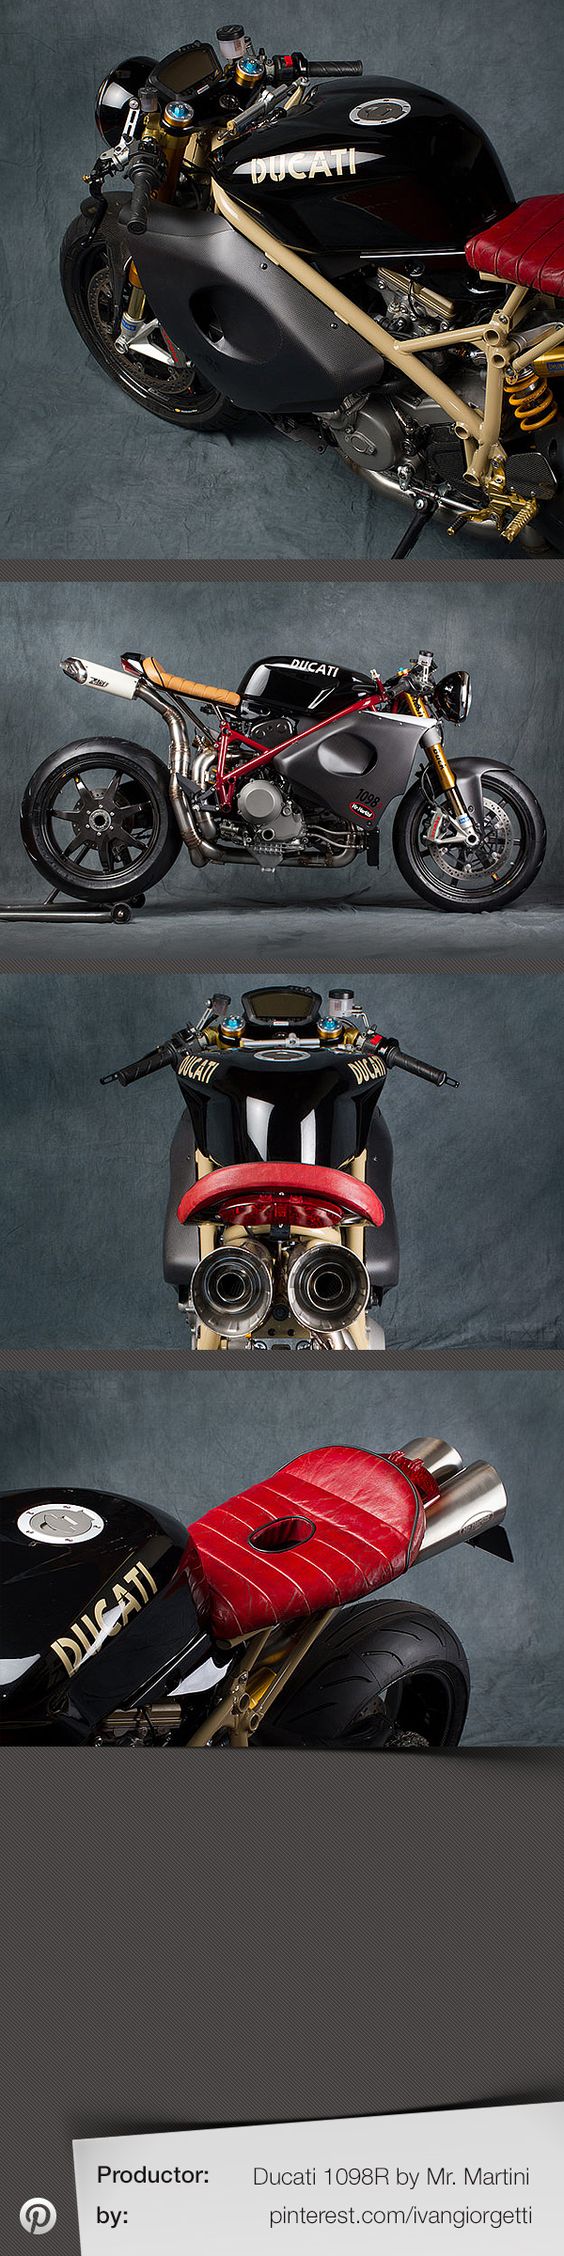 Ducati 1098R by Mr. Martini #custom #motorcycle #caferacer